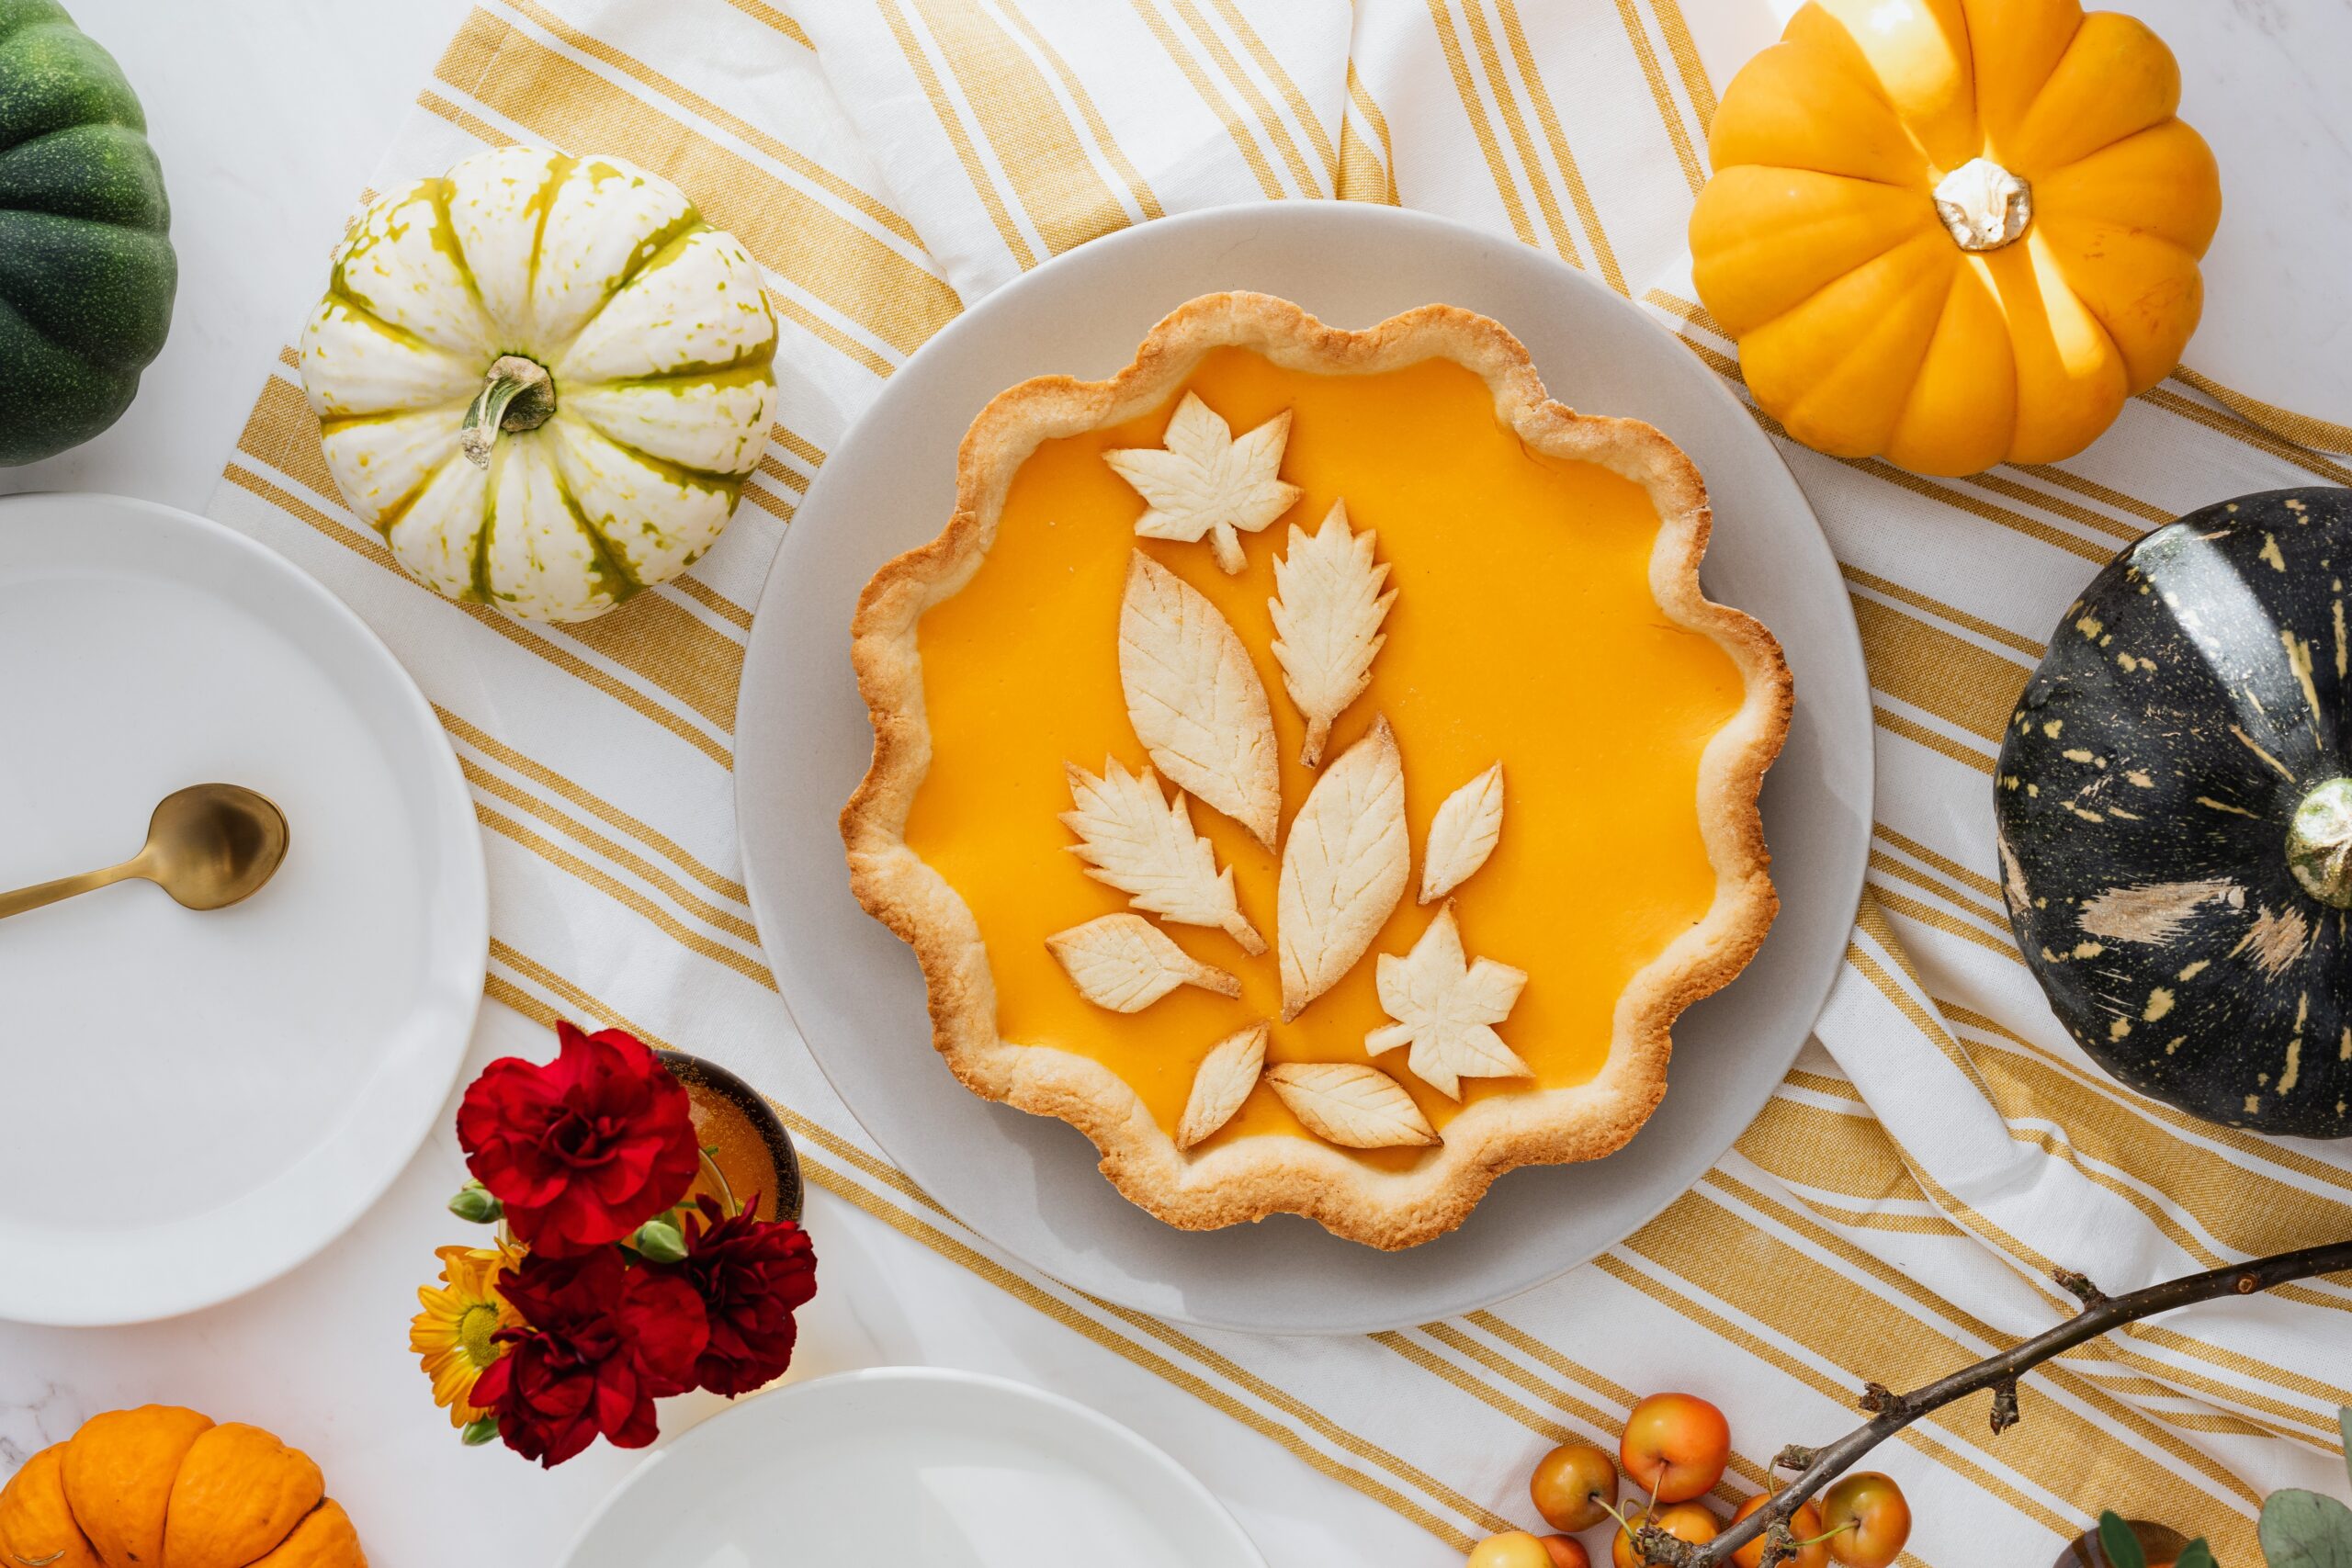 Pumpkin Pie made with Evaporated Milk – The Perfect Fall Dessert, Try it Now